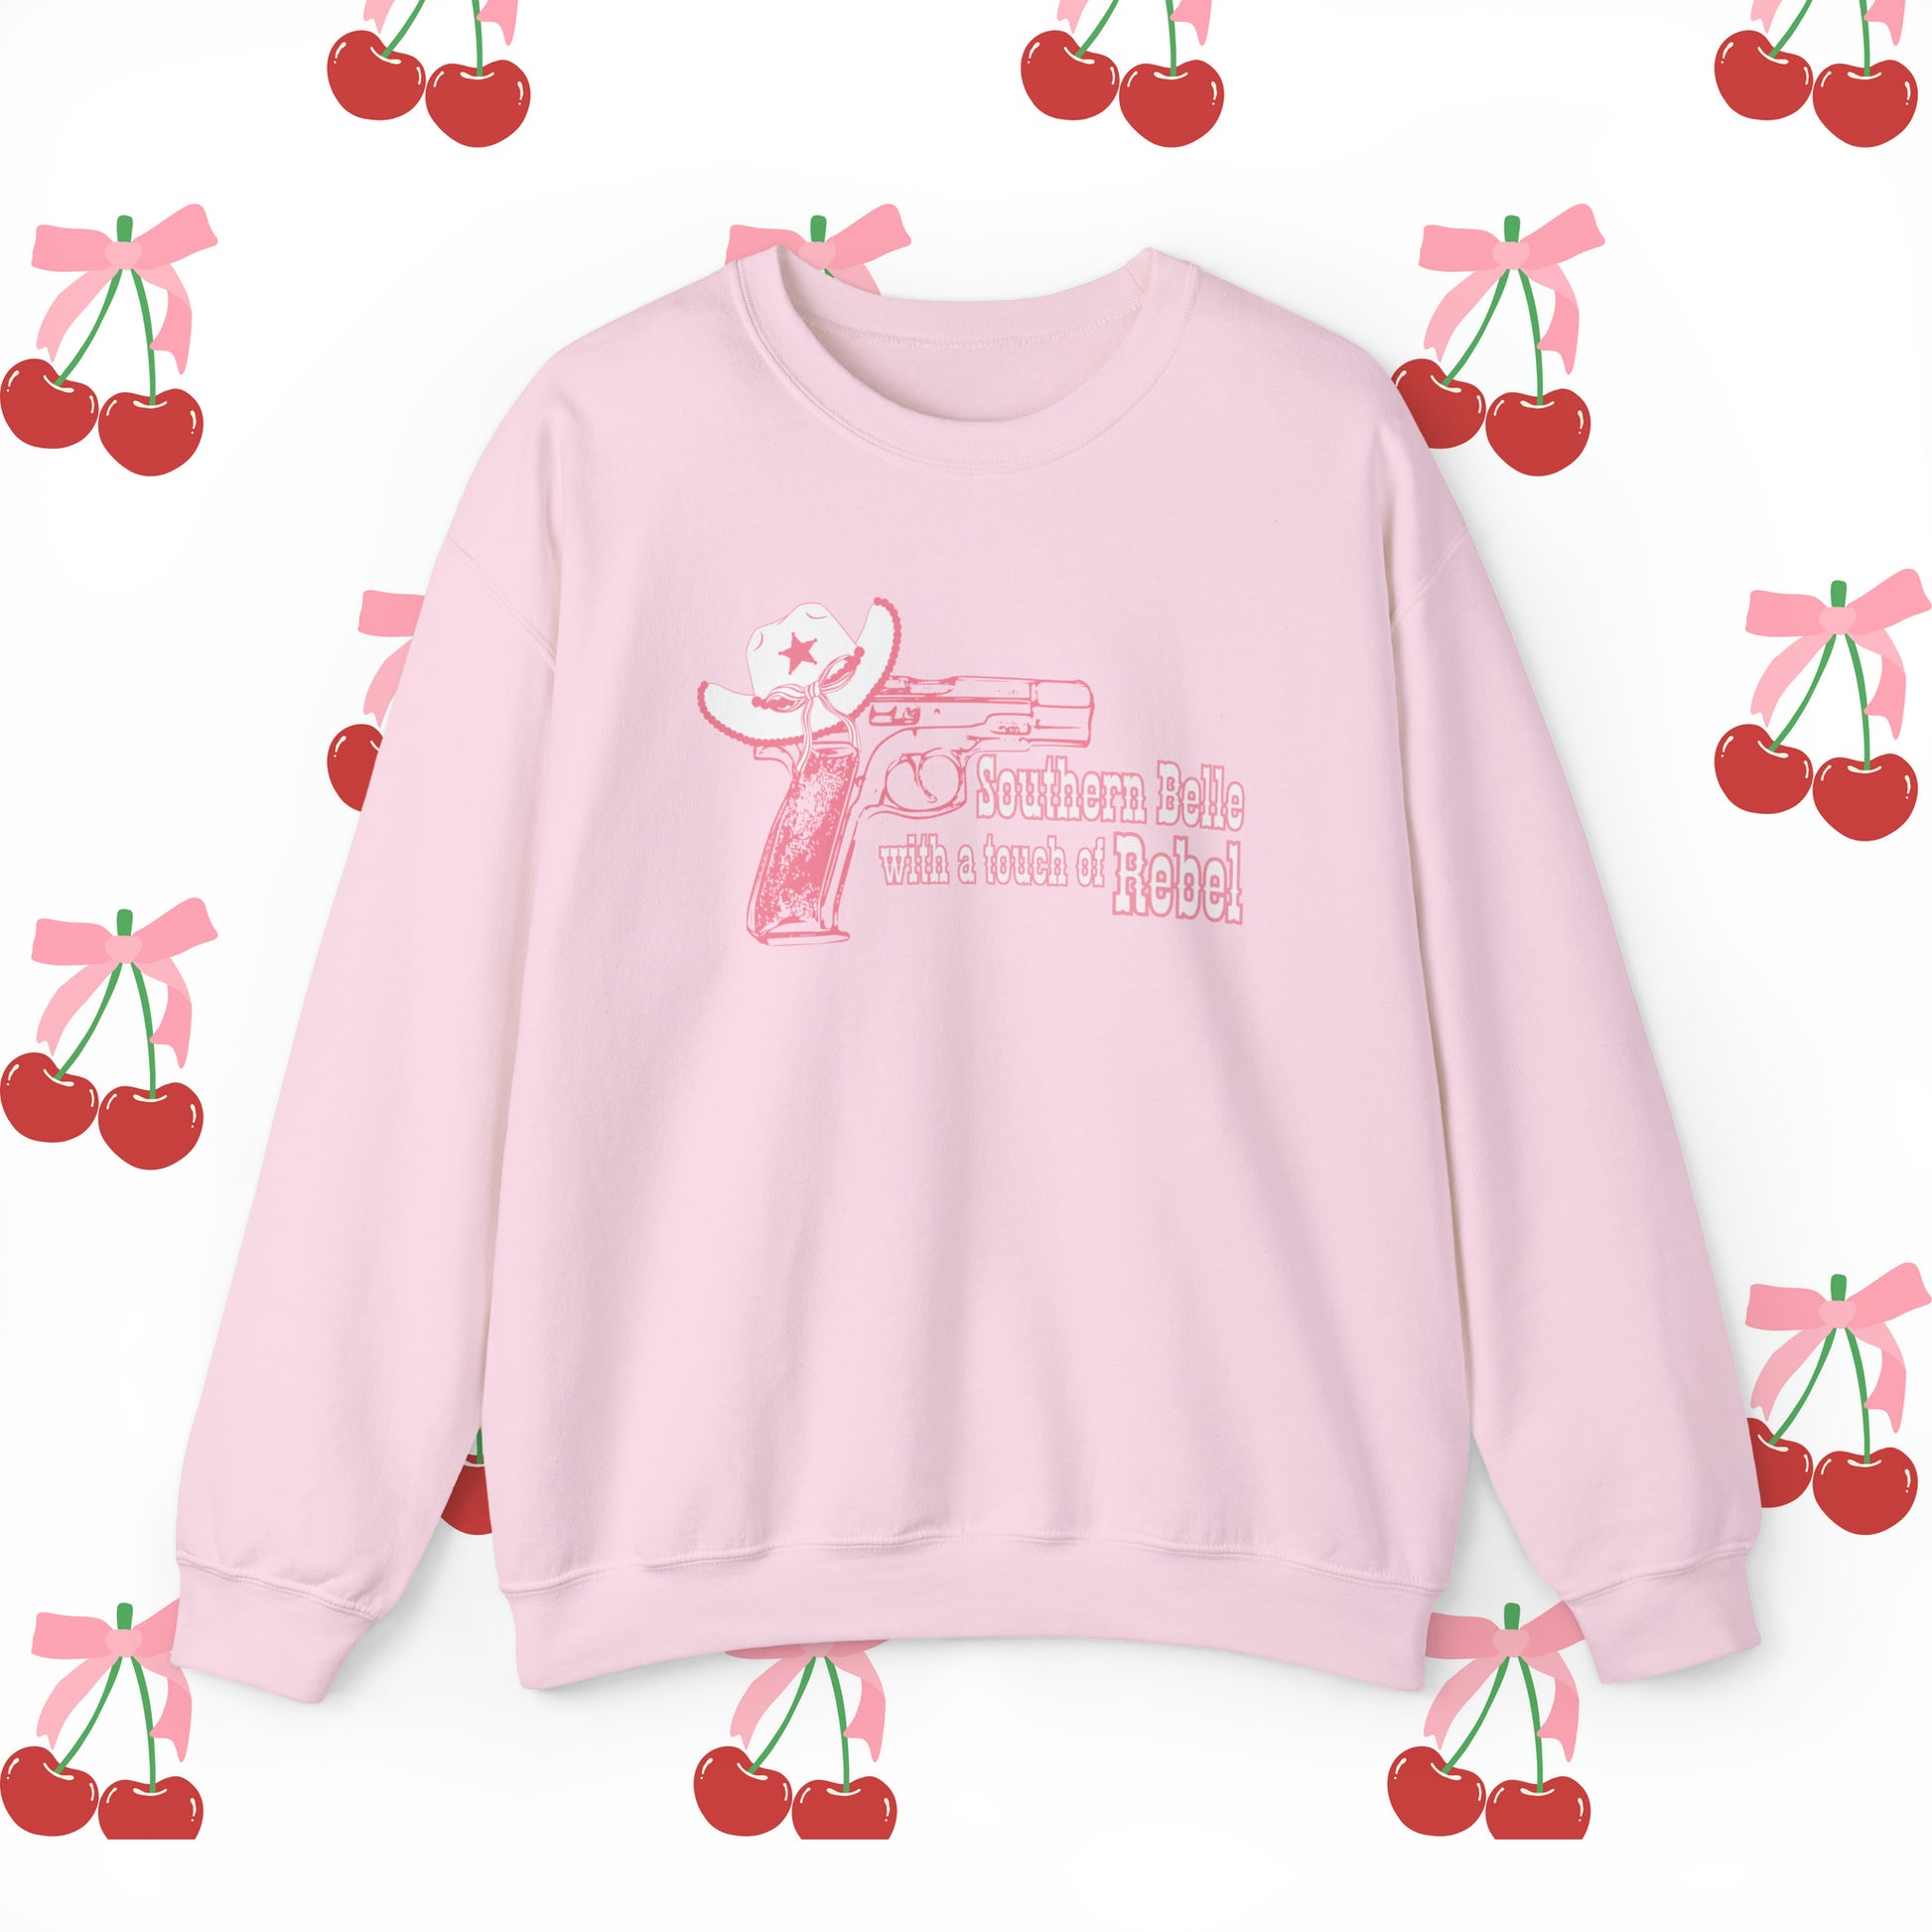 Southern Belle With A Touch Of Rebel Crewneck Sweatshirt Light Pink